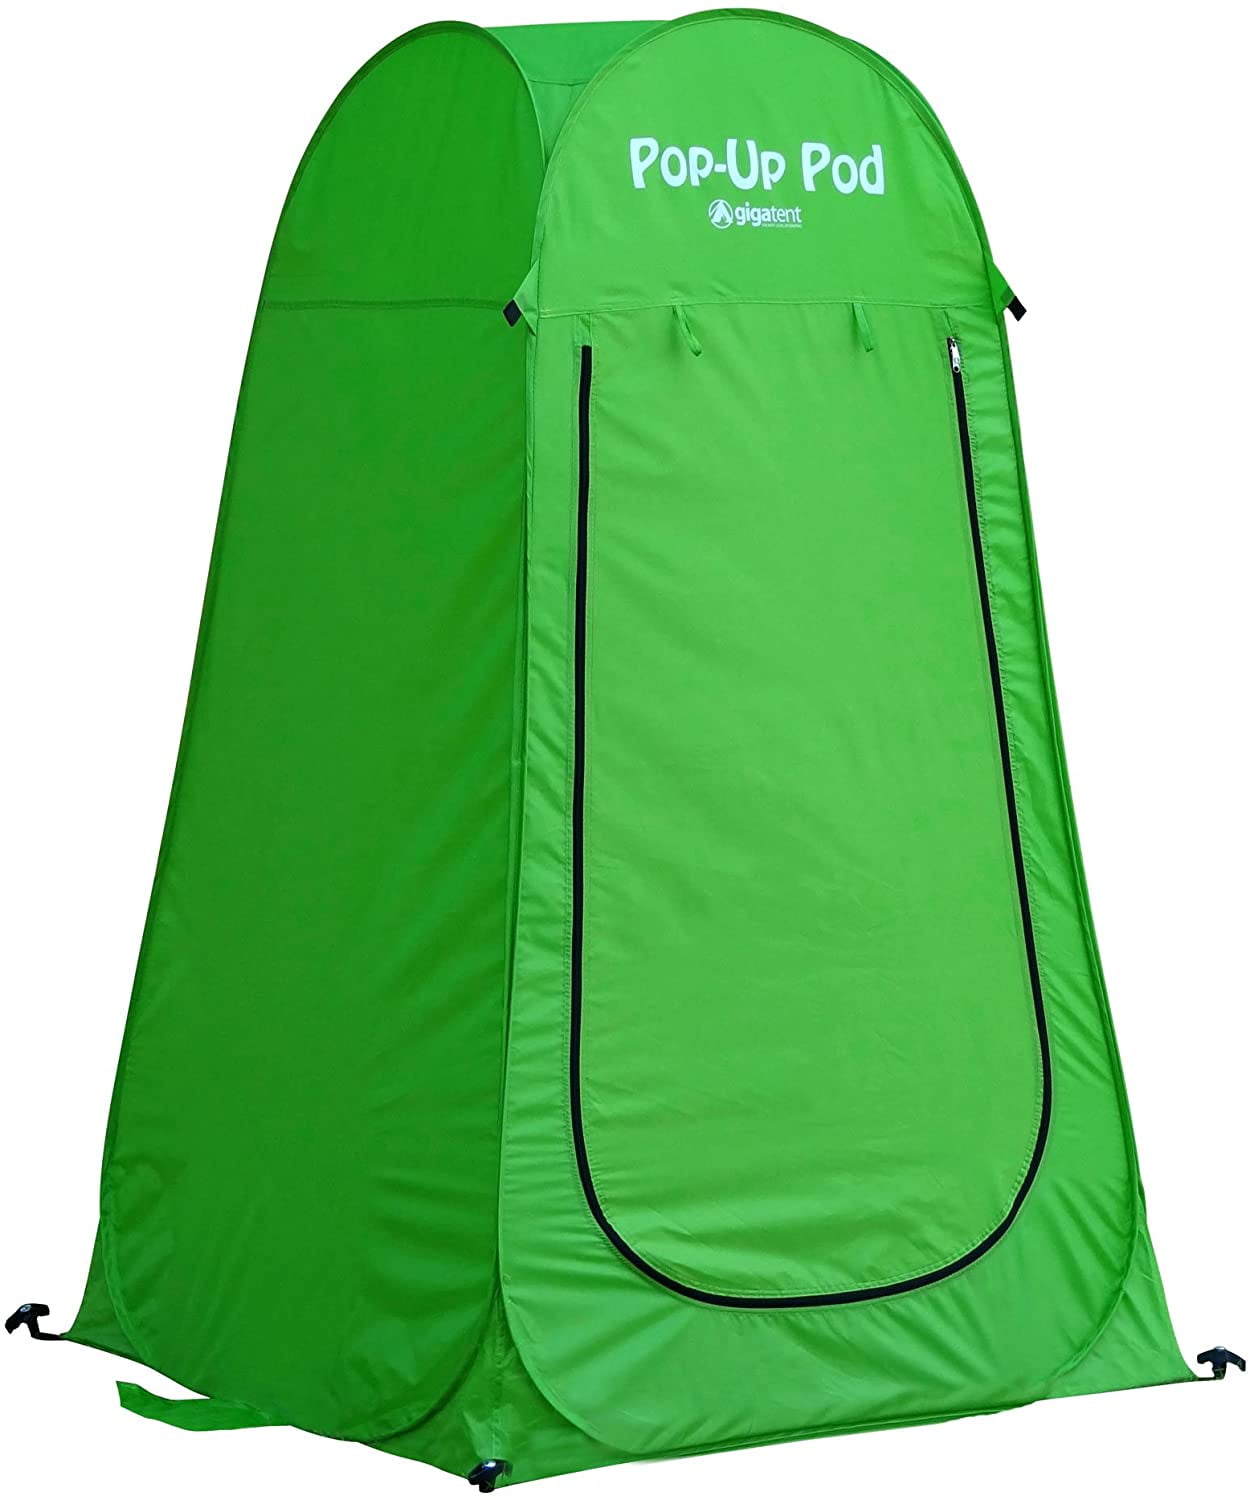 PORTABLE POP-UP TENT OUTDOOR CAMPING TOILET/SHOWER INSTANT CHANGING-PRIVACY-ROOM 